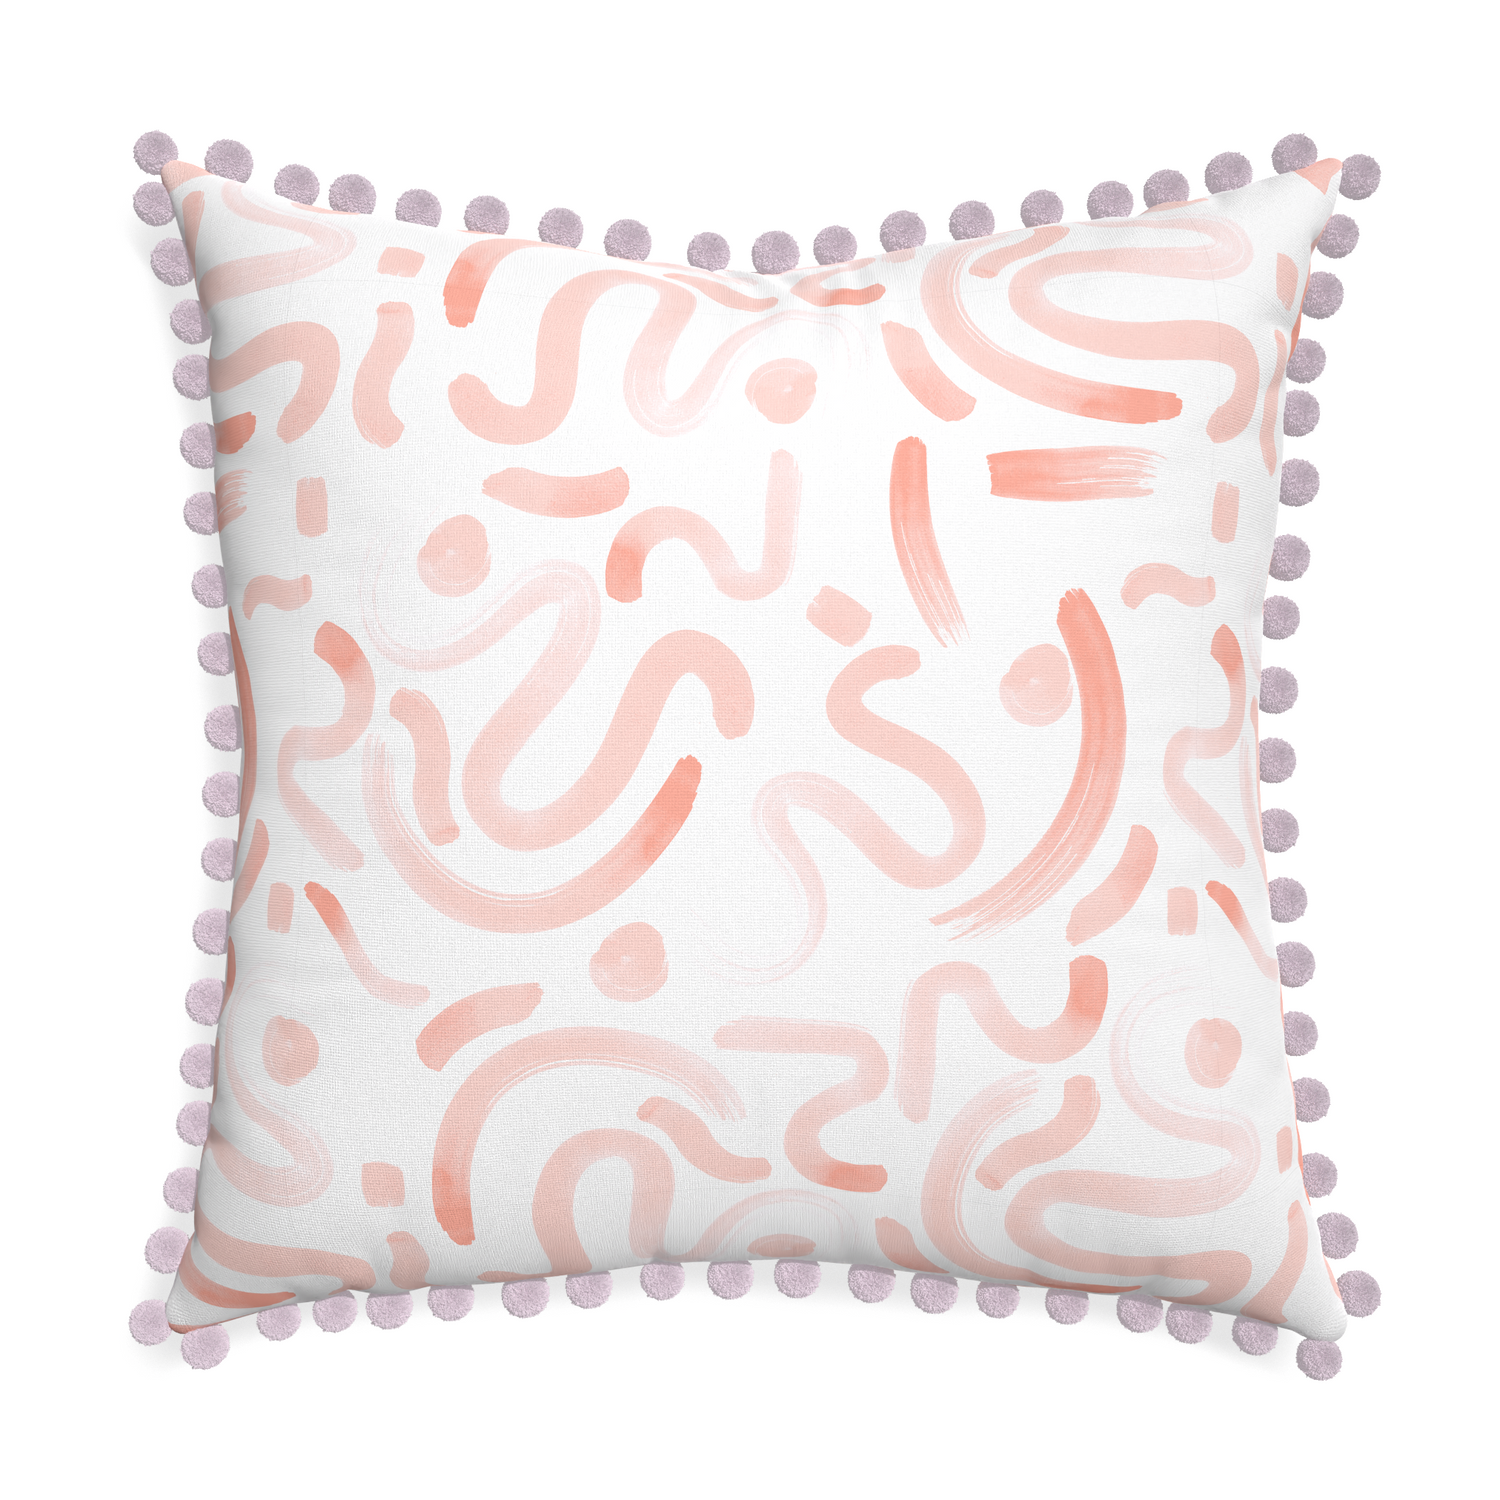 Euro-sham hockney pink custom pink graphicpillow with l on white background